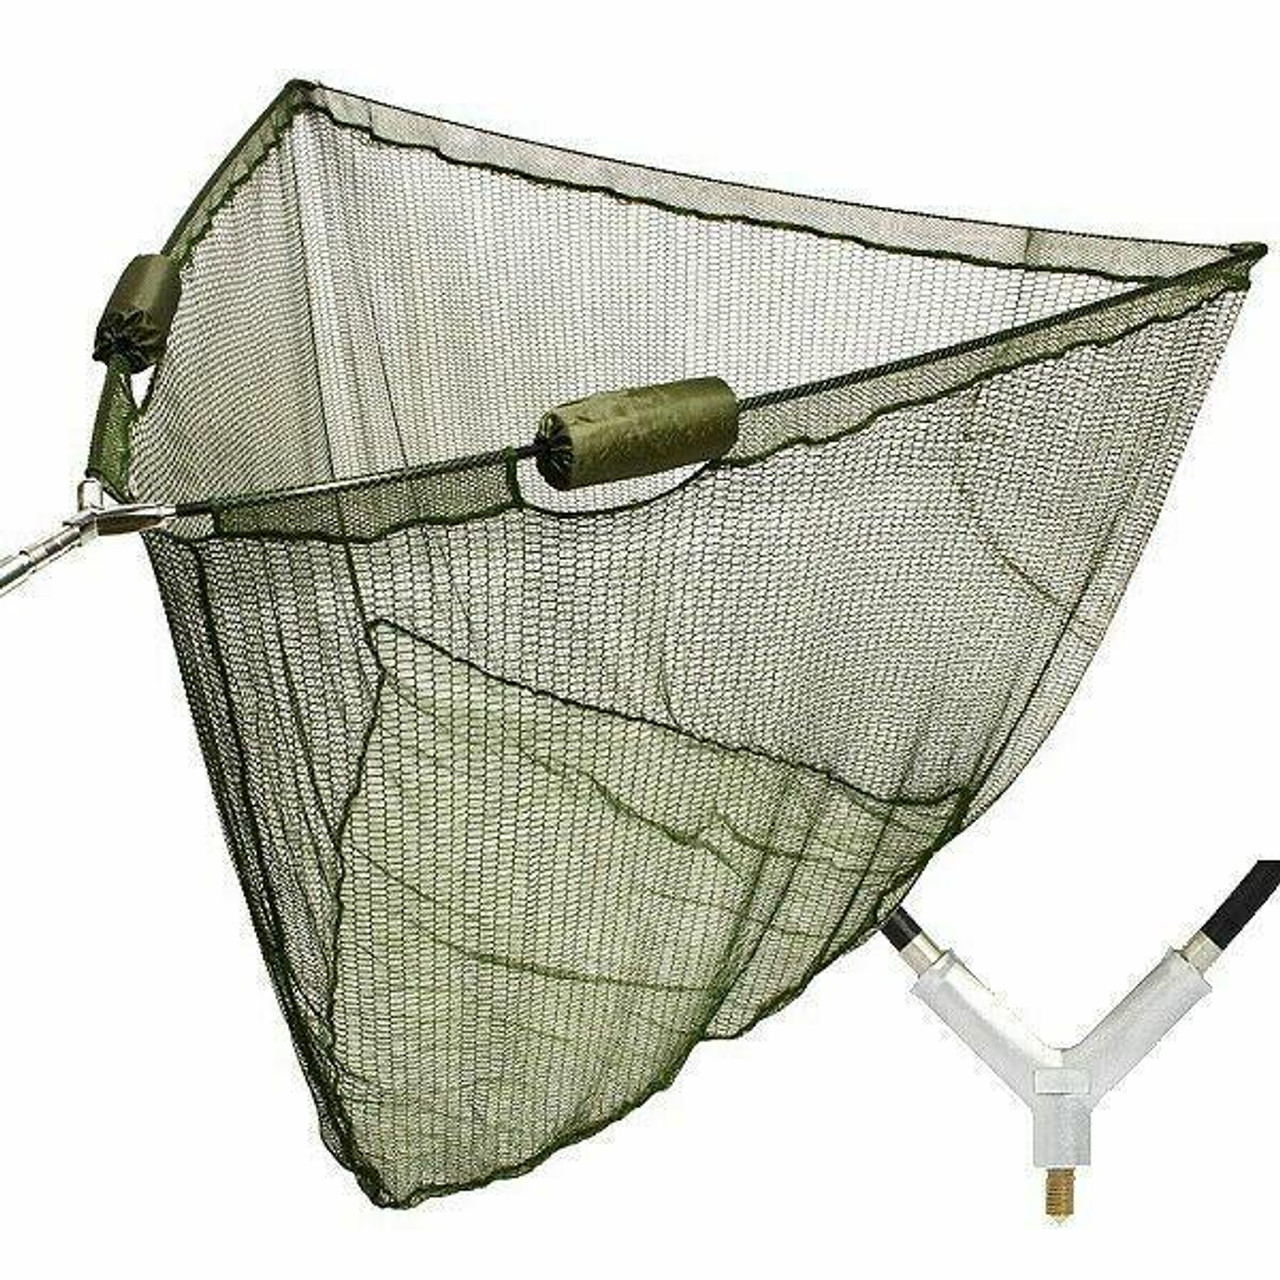 NGT 42” Landing Net with Floats